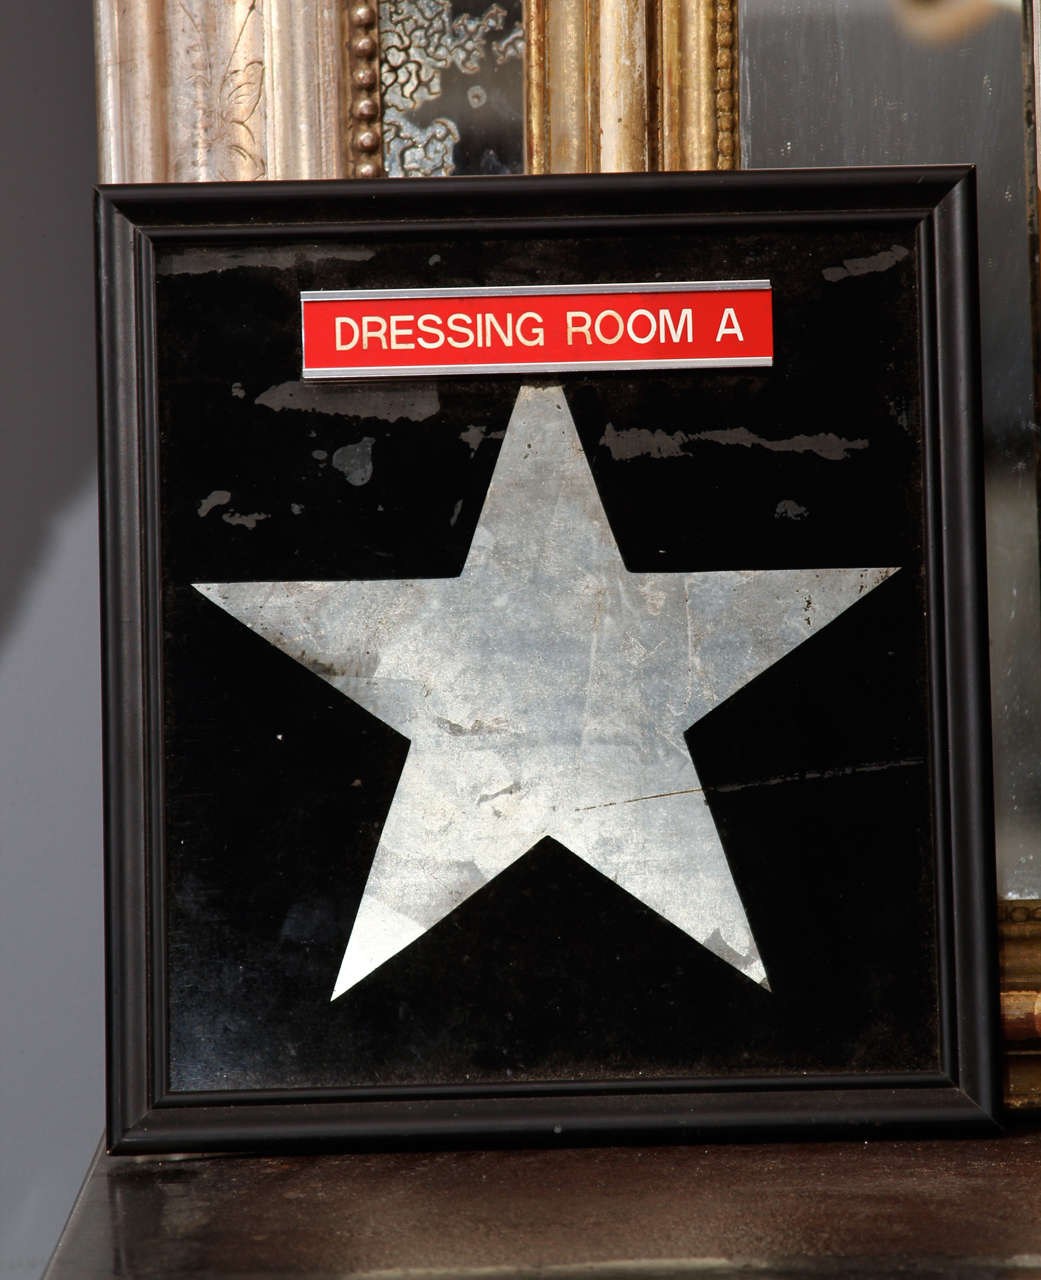 Dressing room star with removable plaque that says 